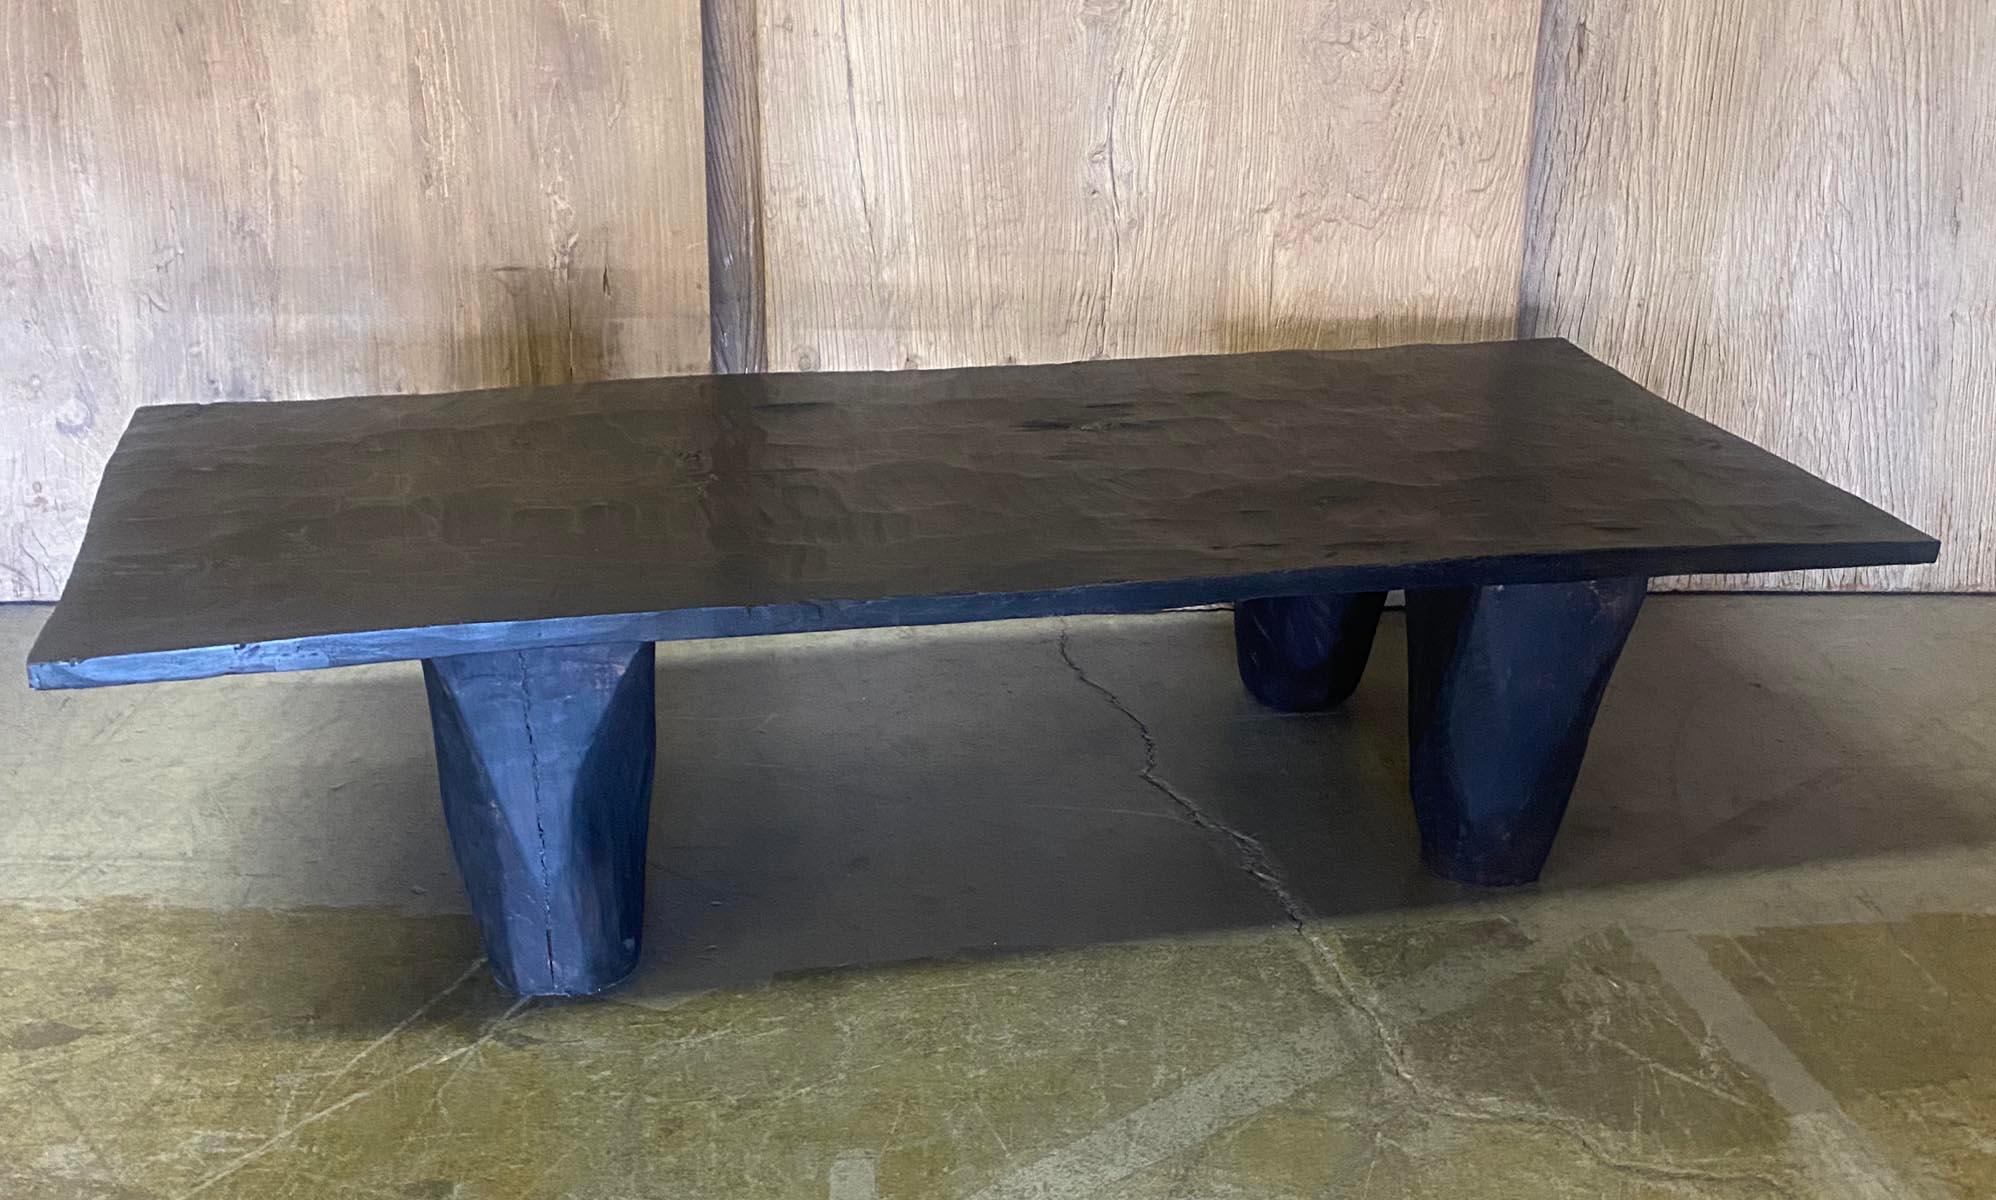 This coffee table is made from one an antique wide board top and reclaimed wood legs, carved in a conical shape. Dark patina, wax finish. Striking